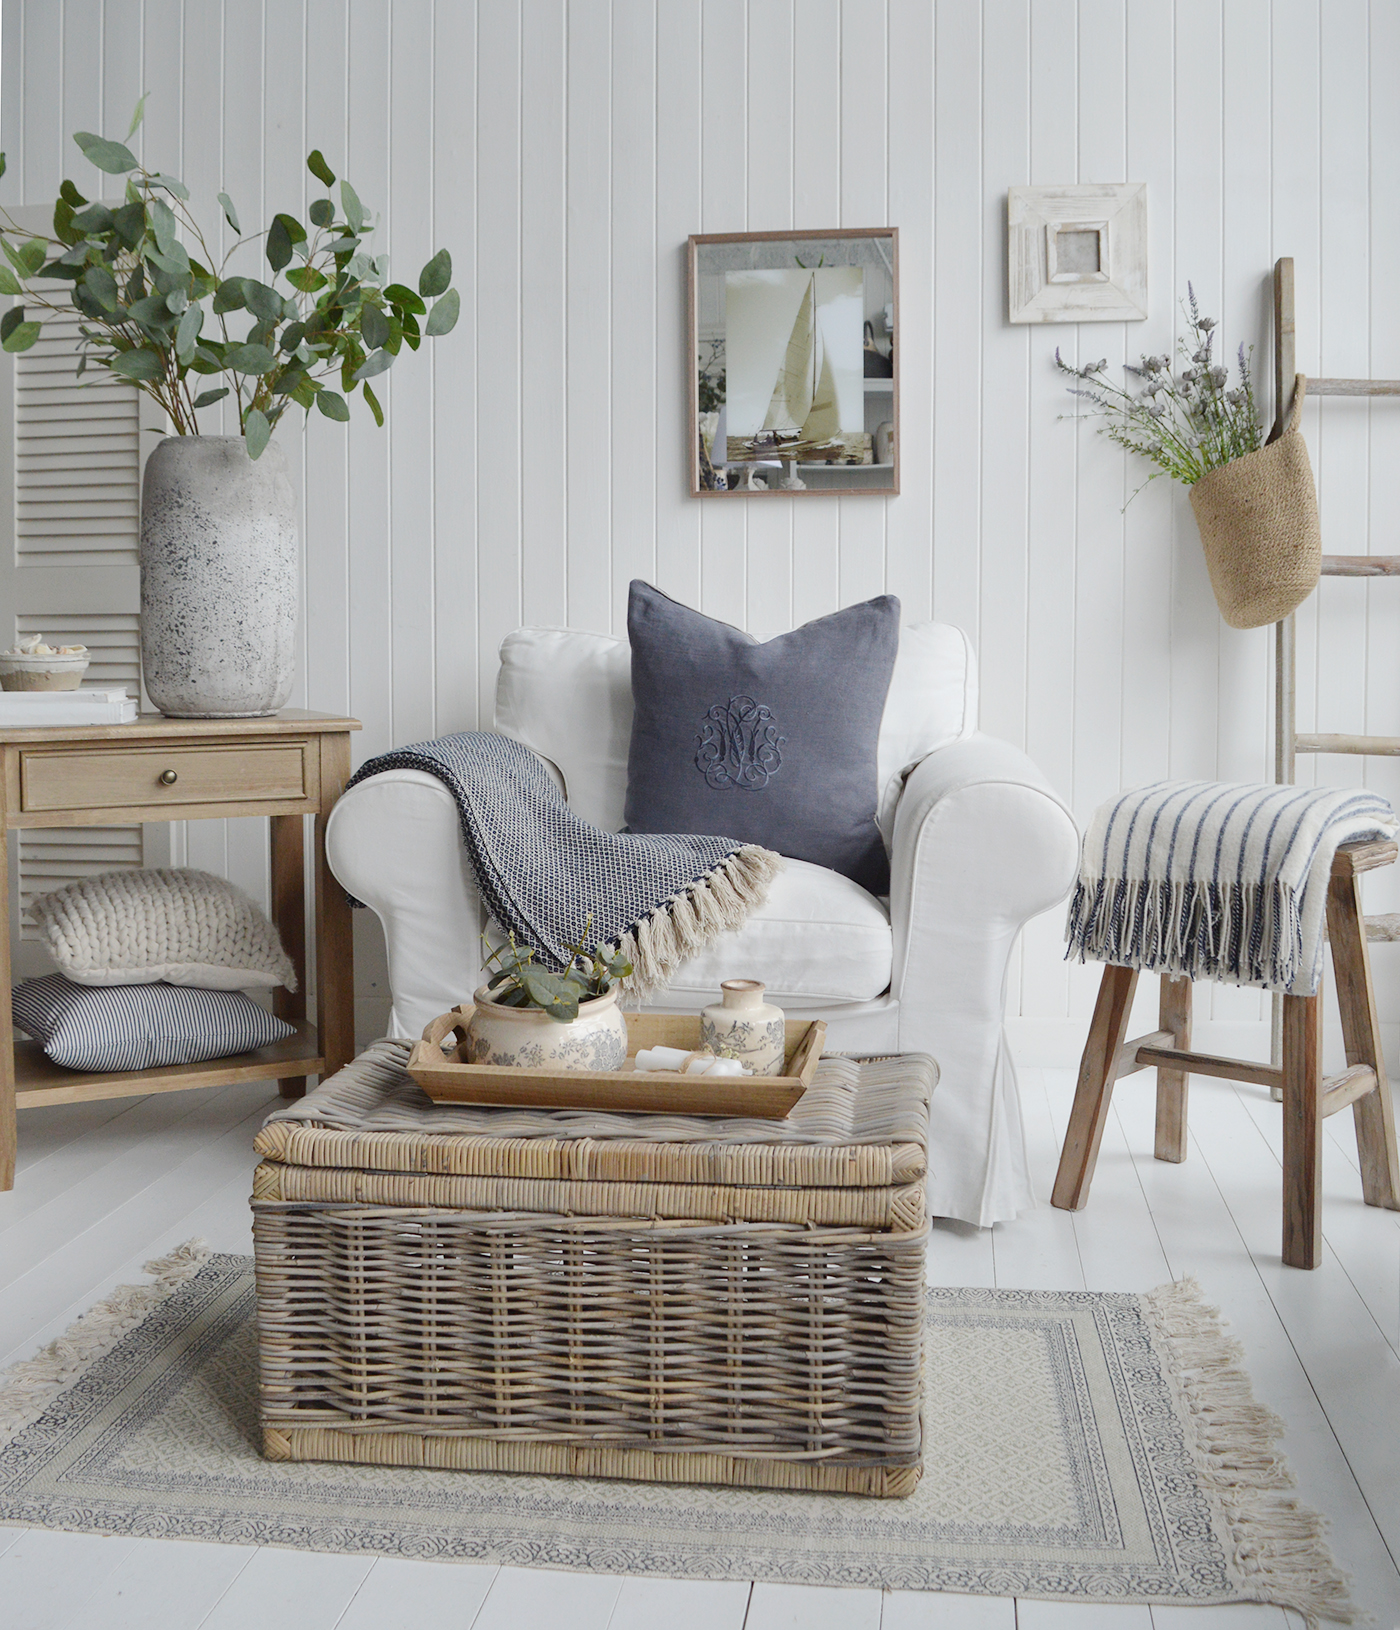 New England interiors for coastal, modern farmhouse, country and Hapmtons styled interiors